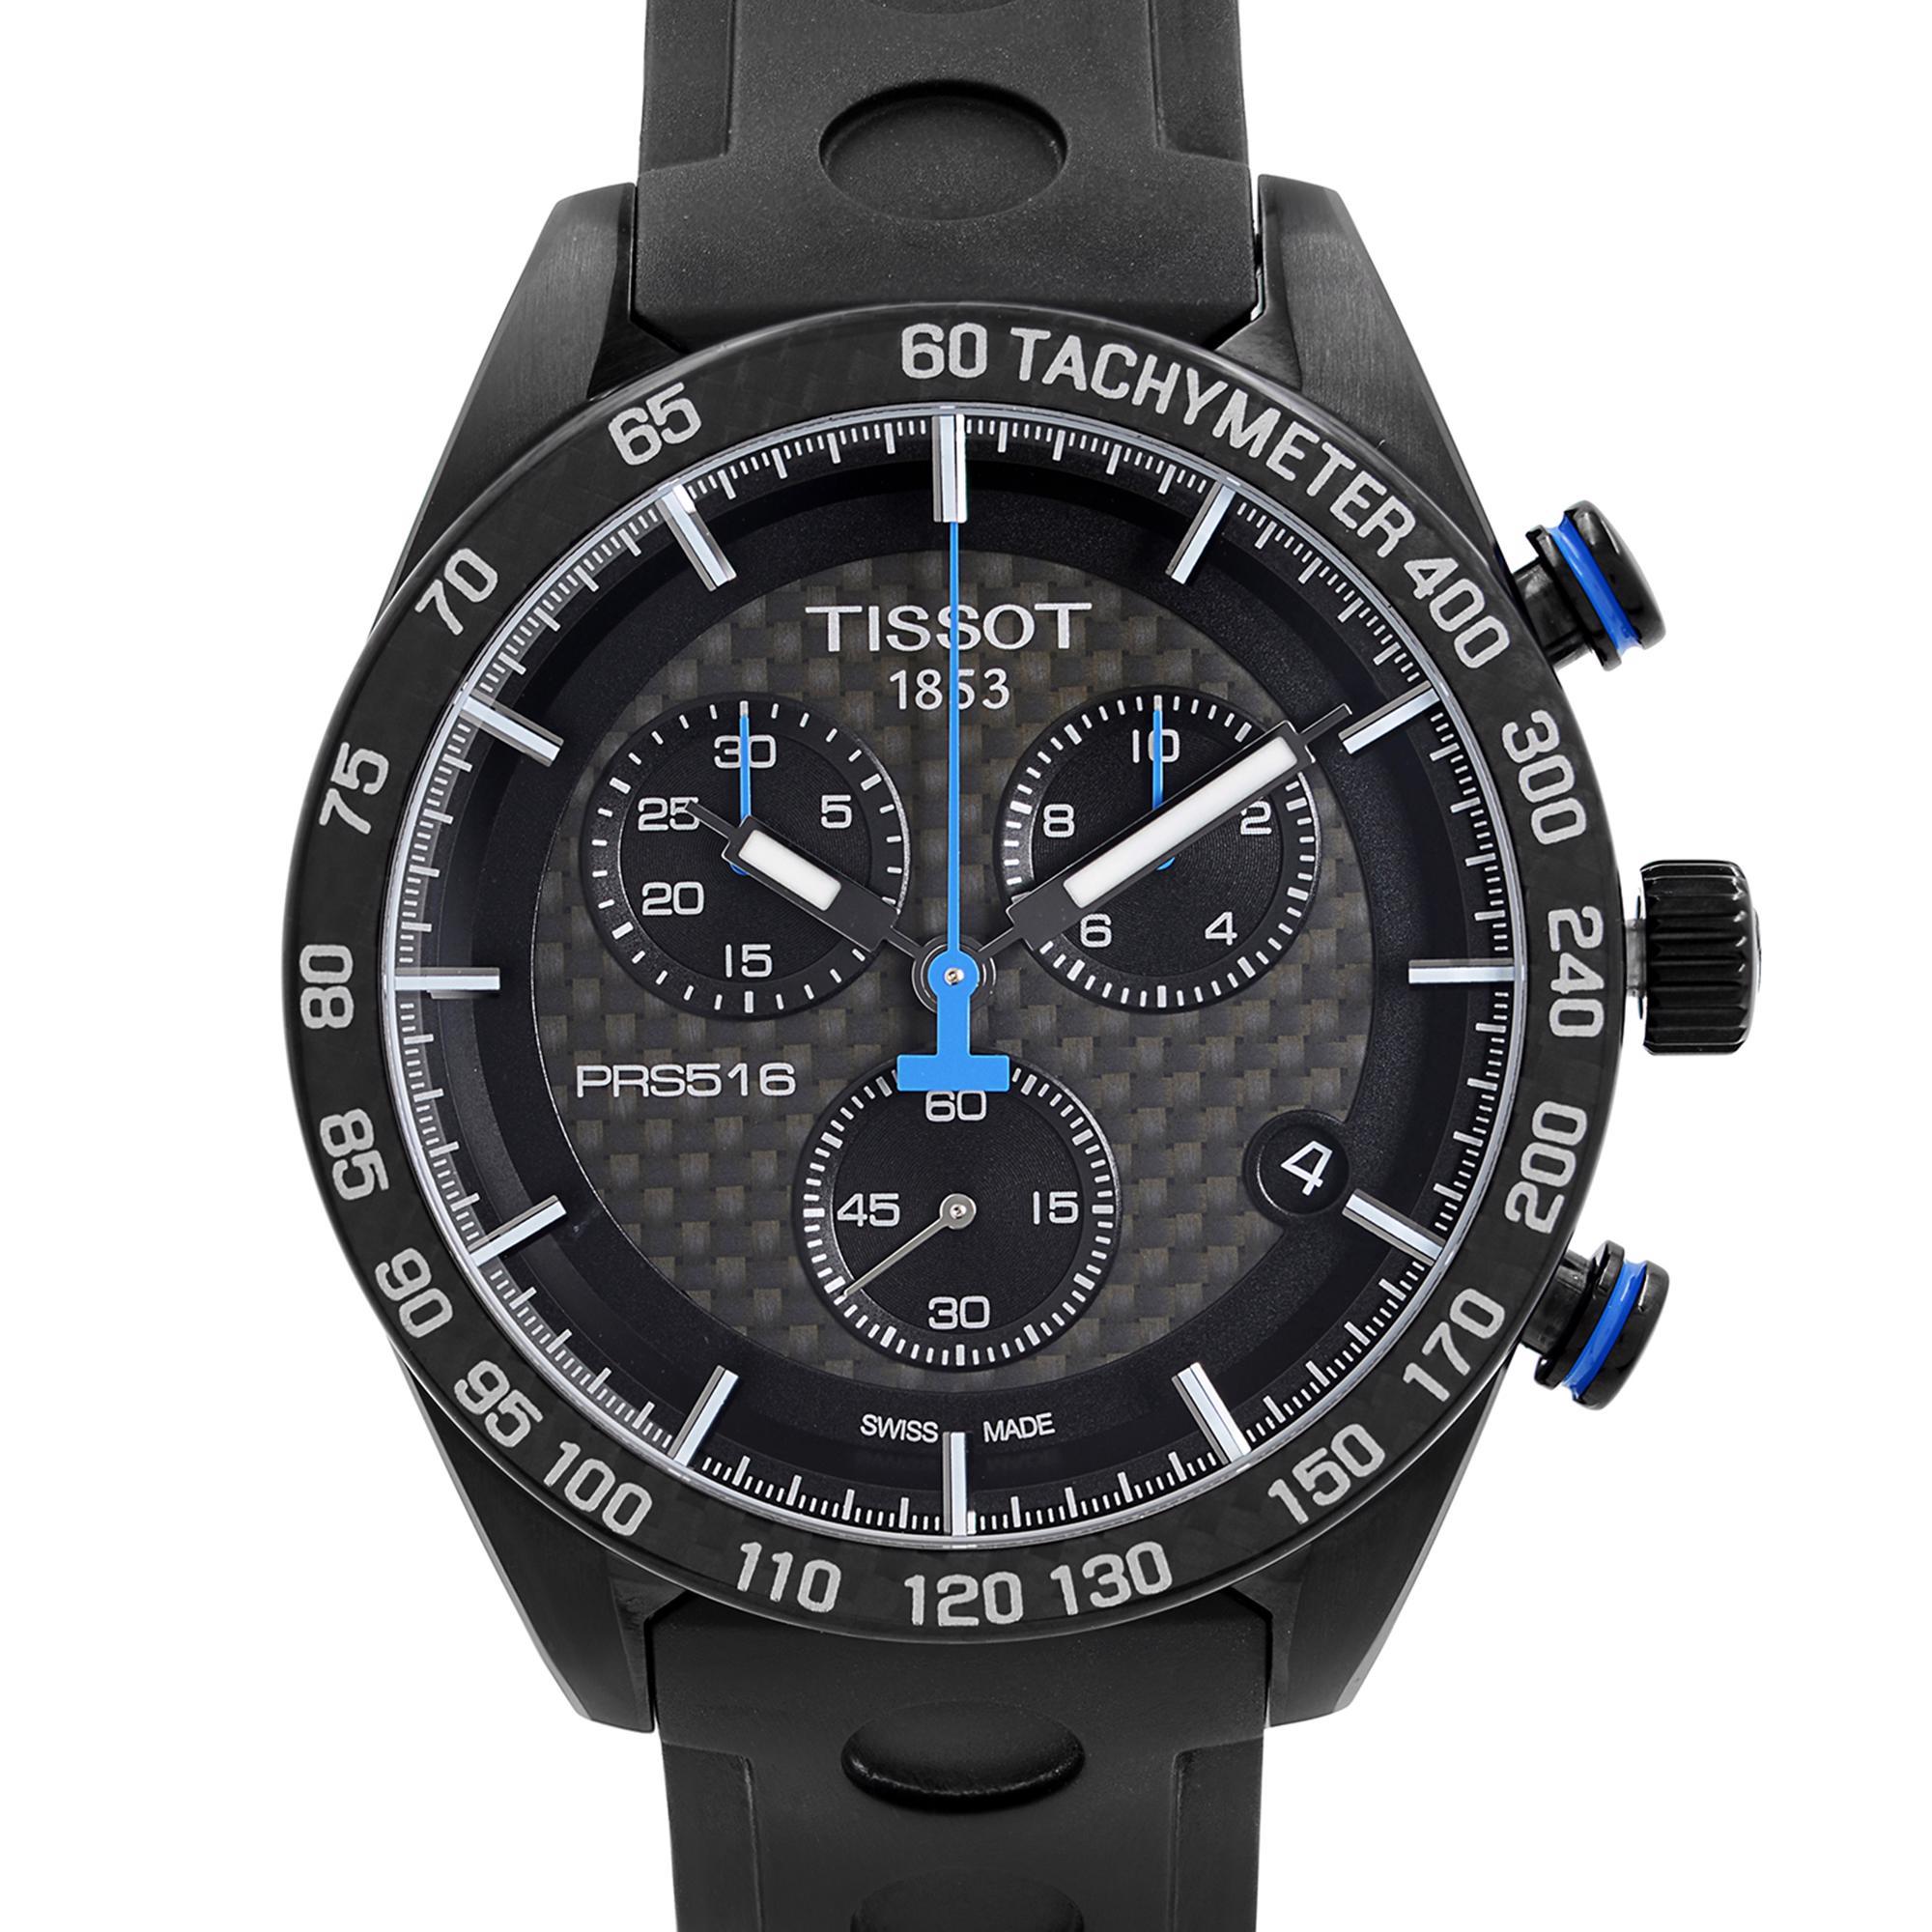 Display Model Tissot PRS 516 T100.417.37.201.00. The Watch May Have Minor Blemishes Due to Store Handling. This Beautiful Timepiece Features: Black PVD Stainless Steel Case with a Rubber Bracelet. Black Dial with Luminous Hands, And Index Hour